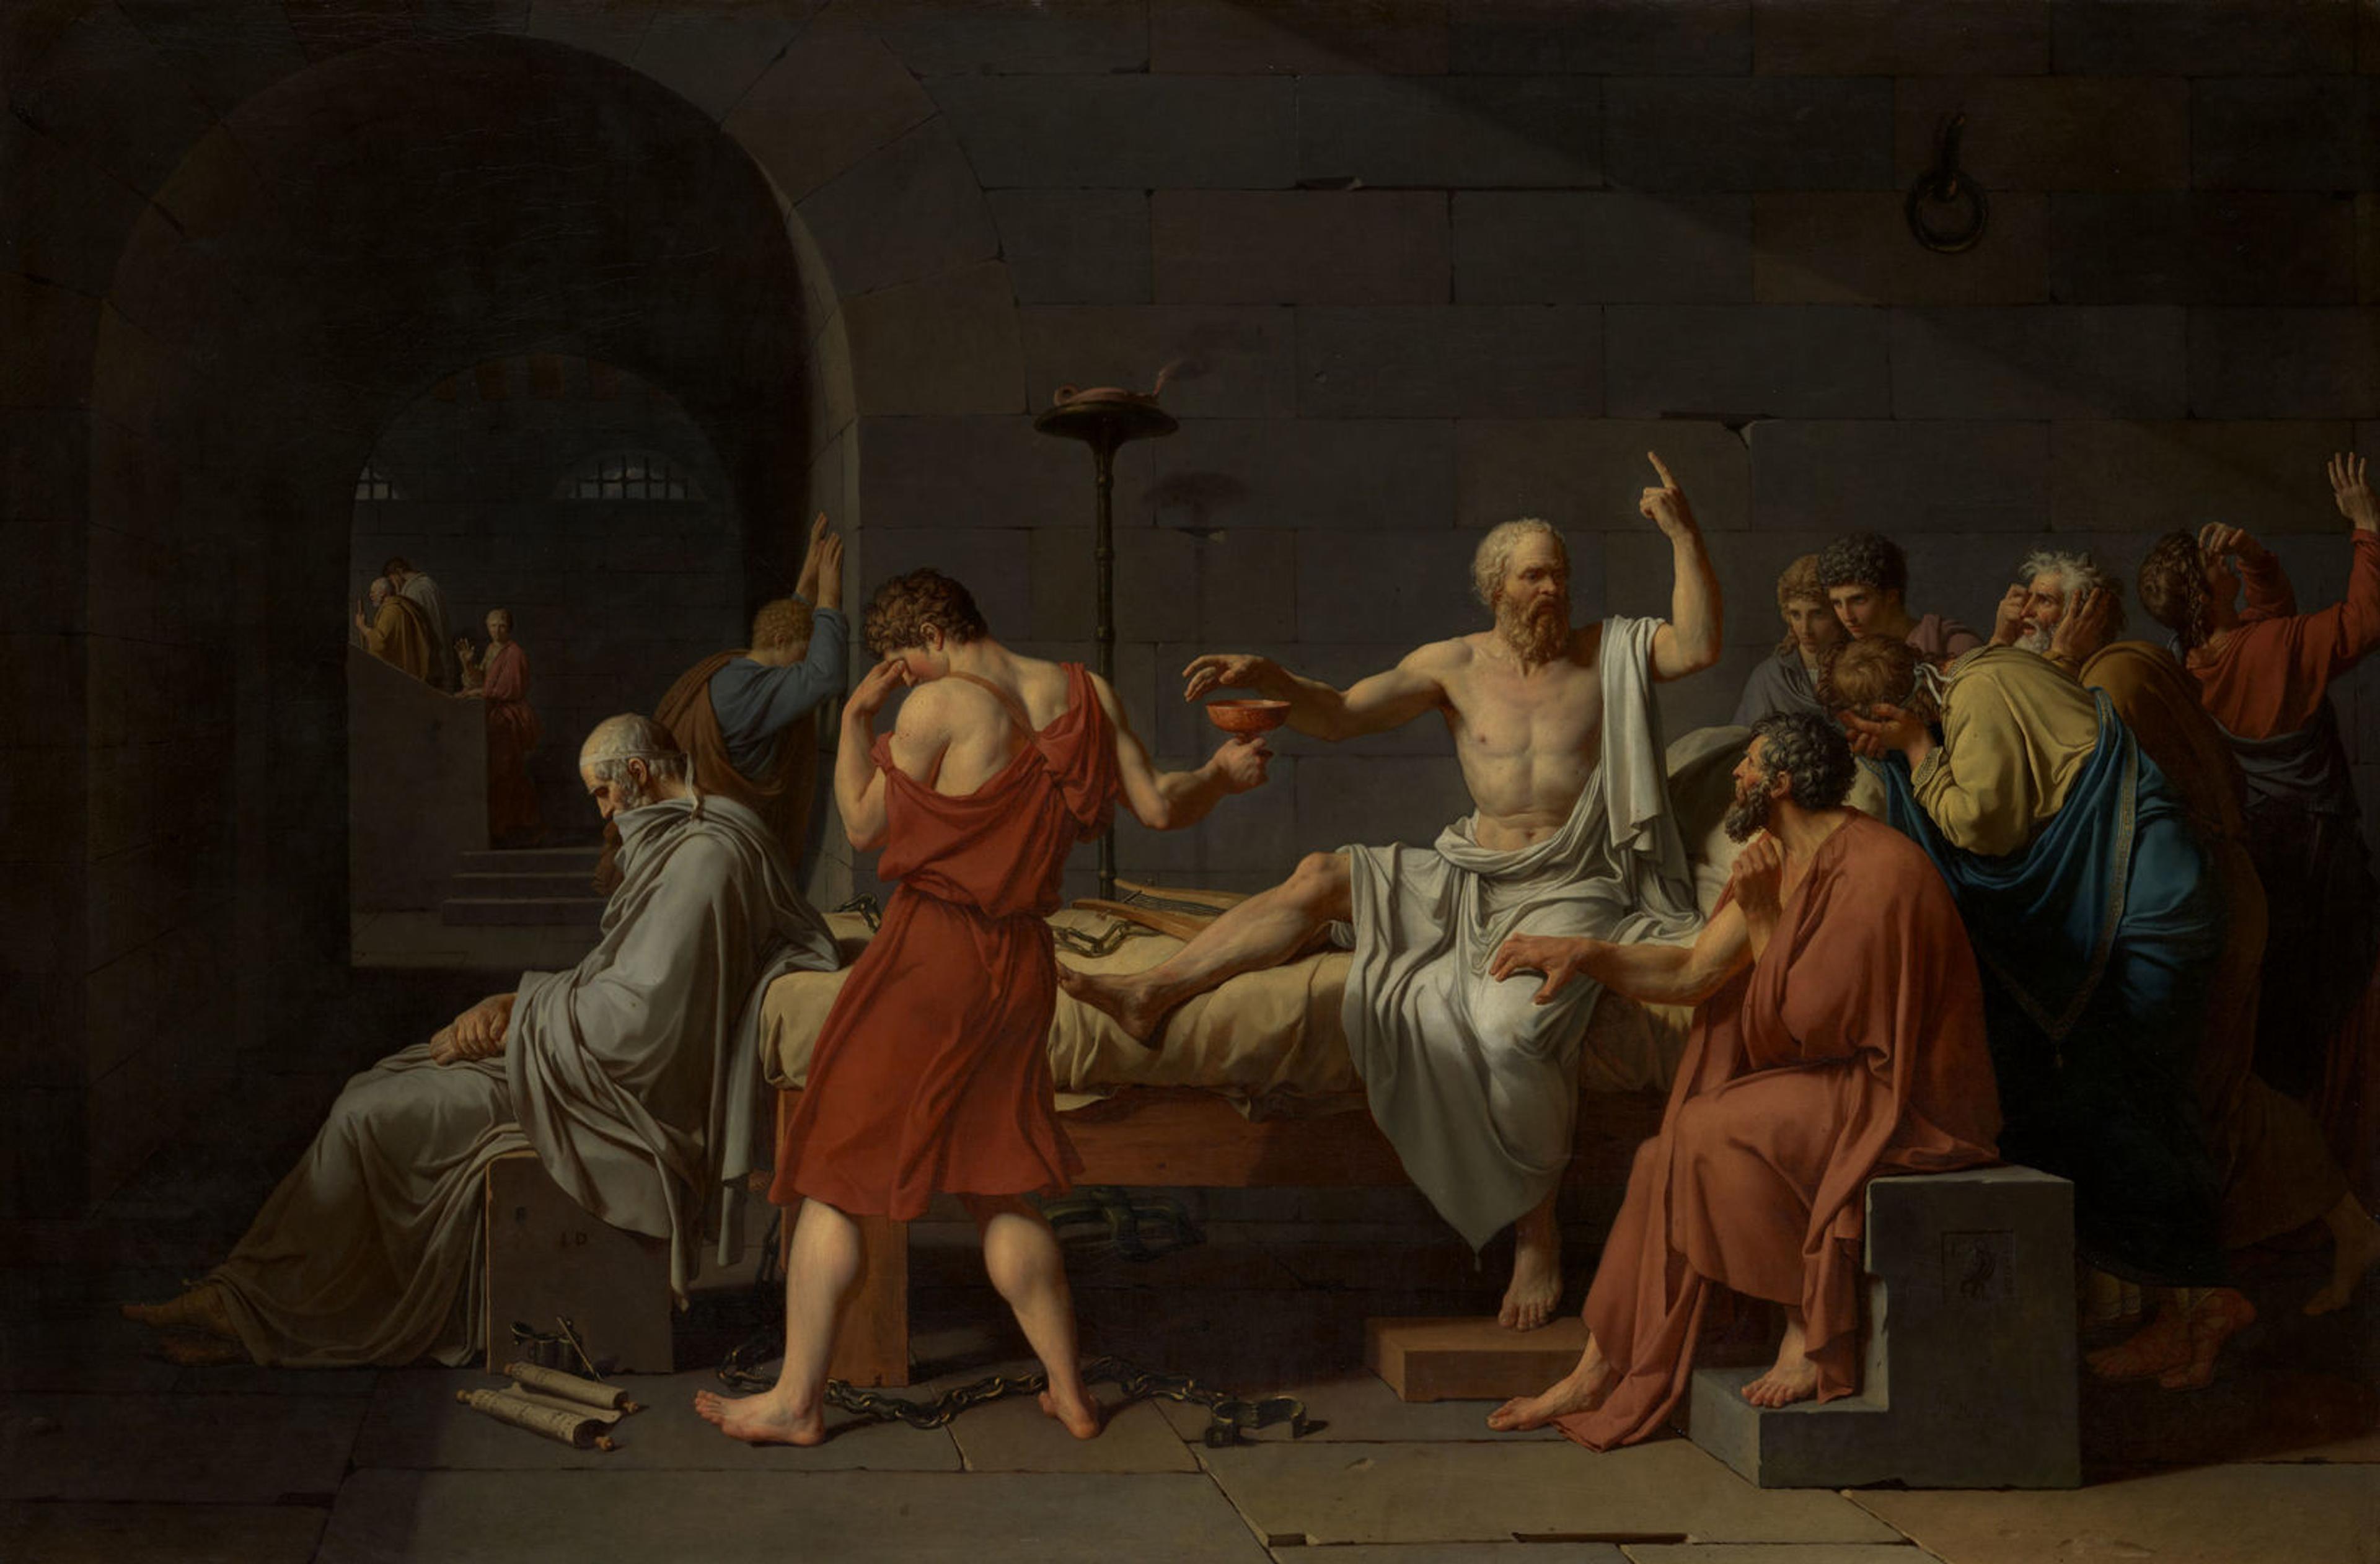 Jacques Louis David's "Death of Socrates" showing a group of men surrounding a central figure, Socrates, speaking to them with a serious facial expression